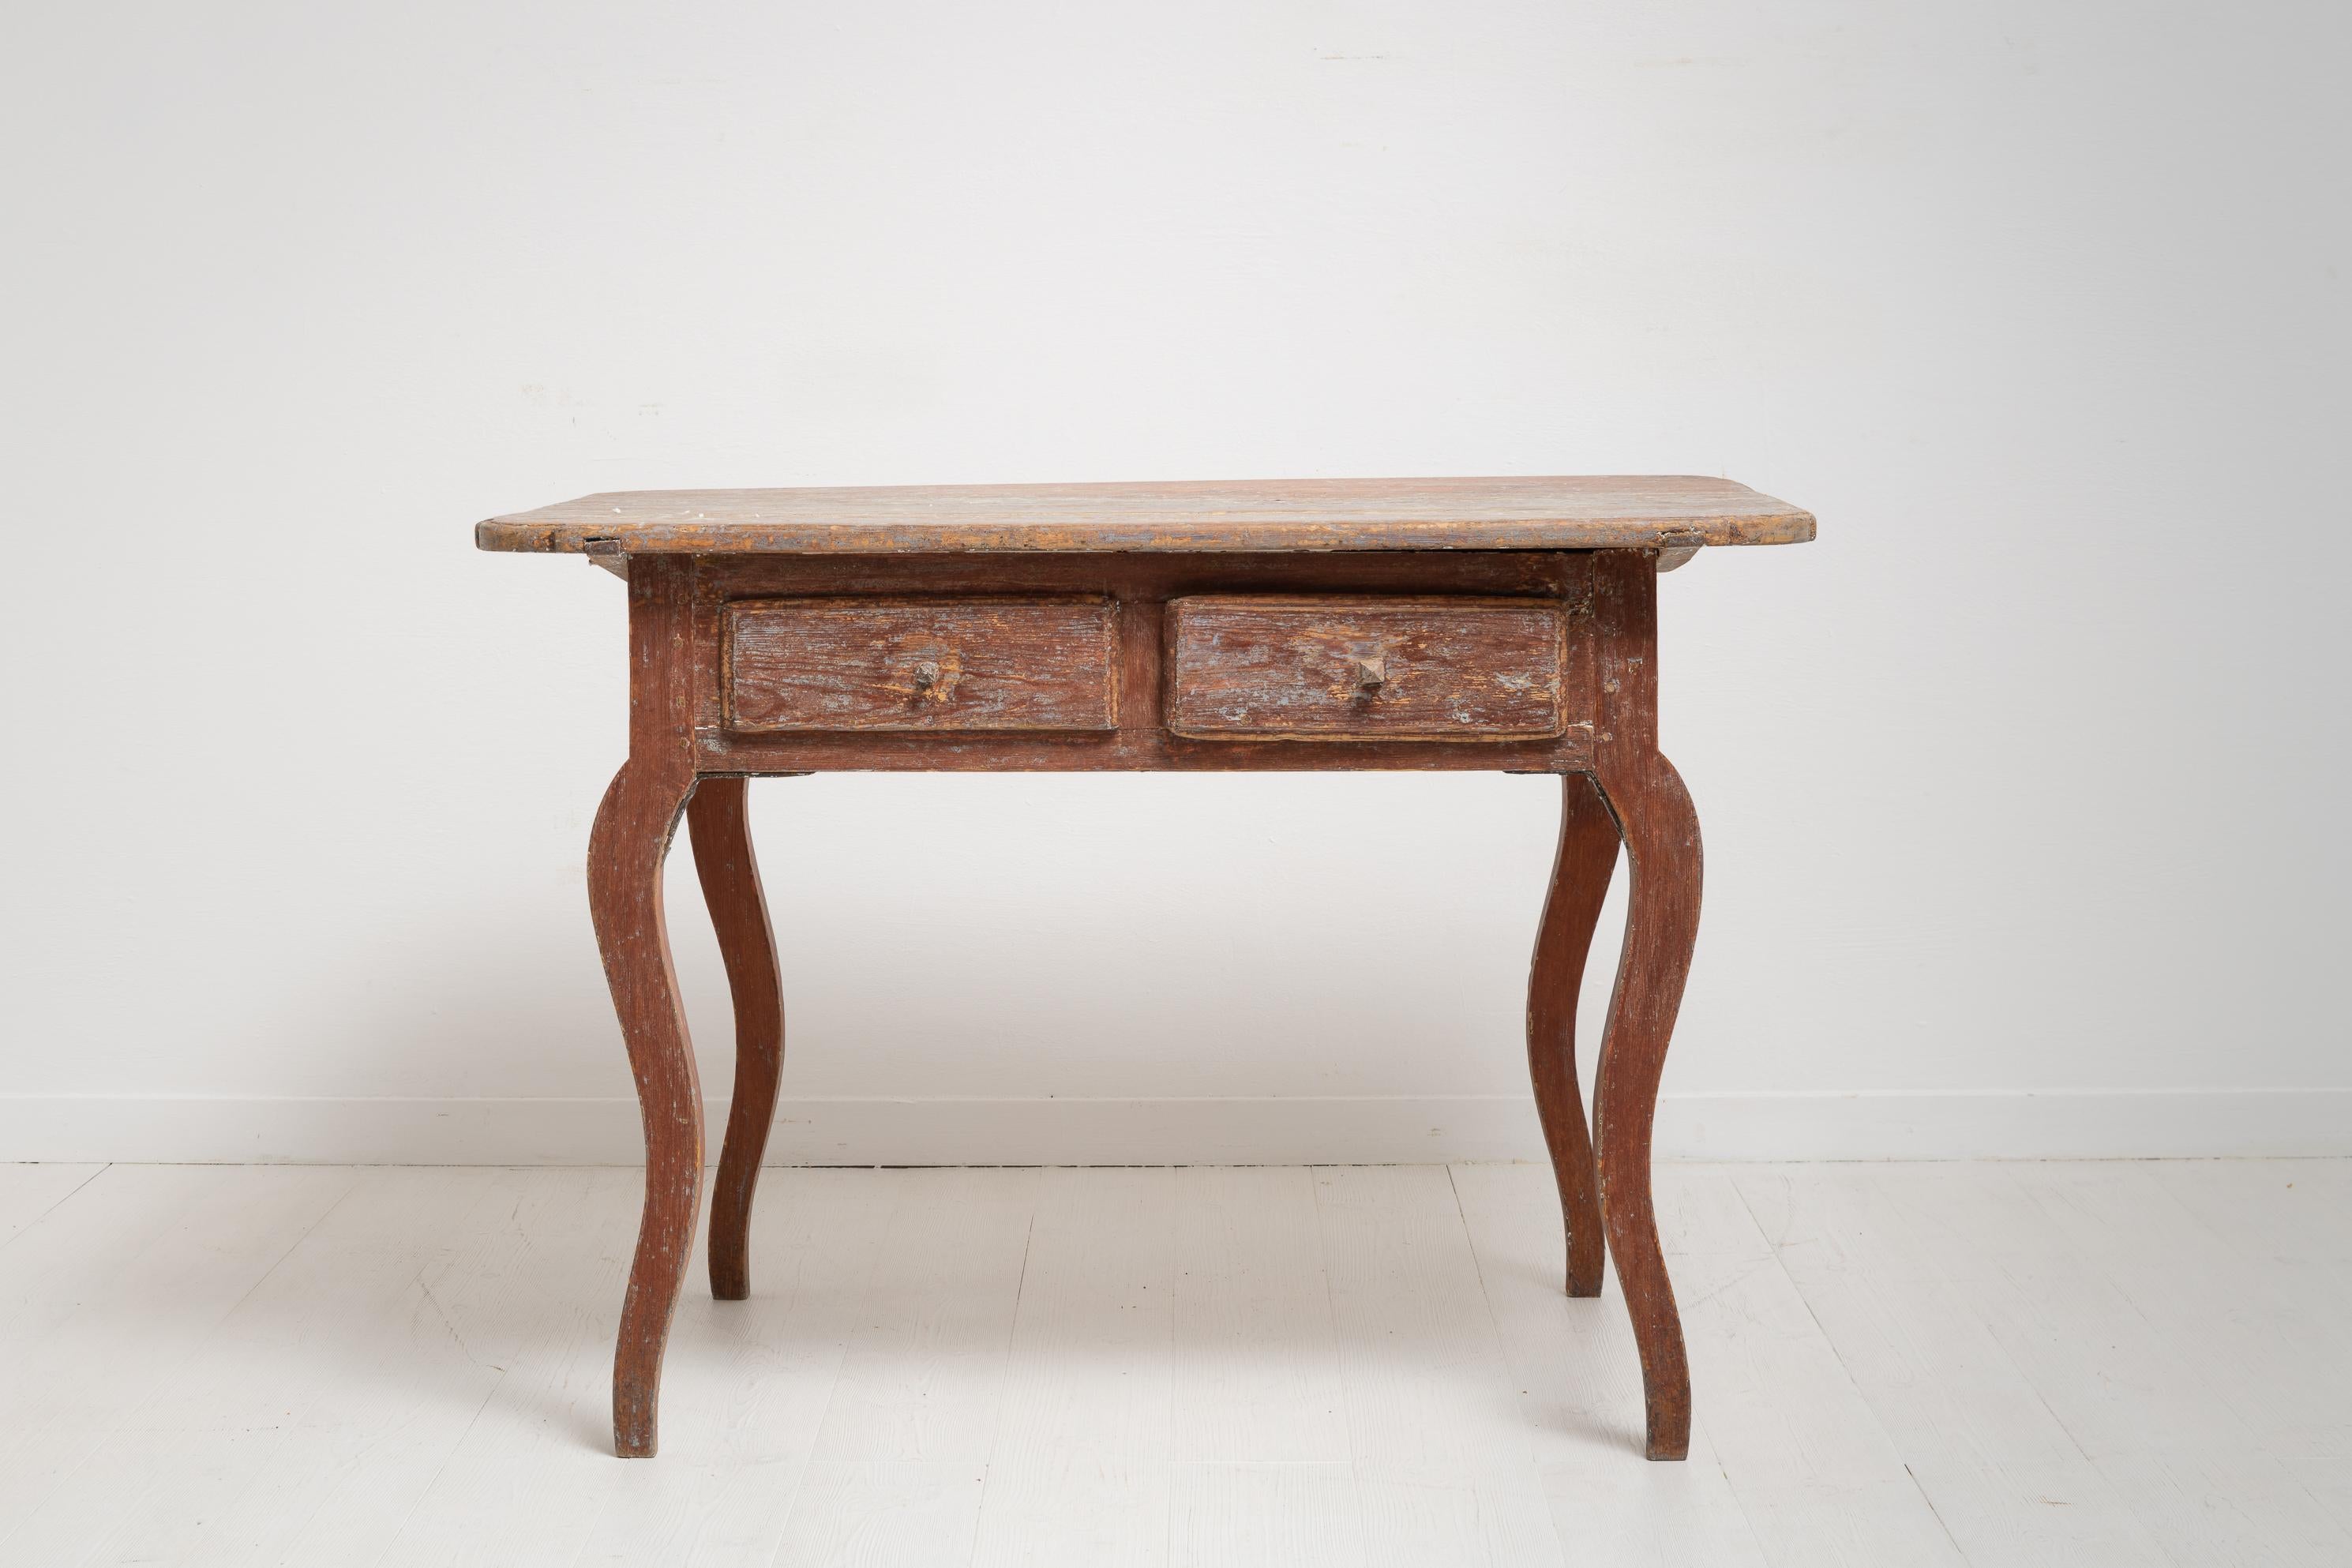 Unusual and genuine Rococo table made around 1780 to 1790. This country table is from Northern Sweden and made in pine with curved Rococo legs and original paint from the 1700s. The paint has a natural wear and authentic patina after 250 years of